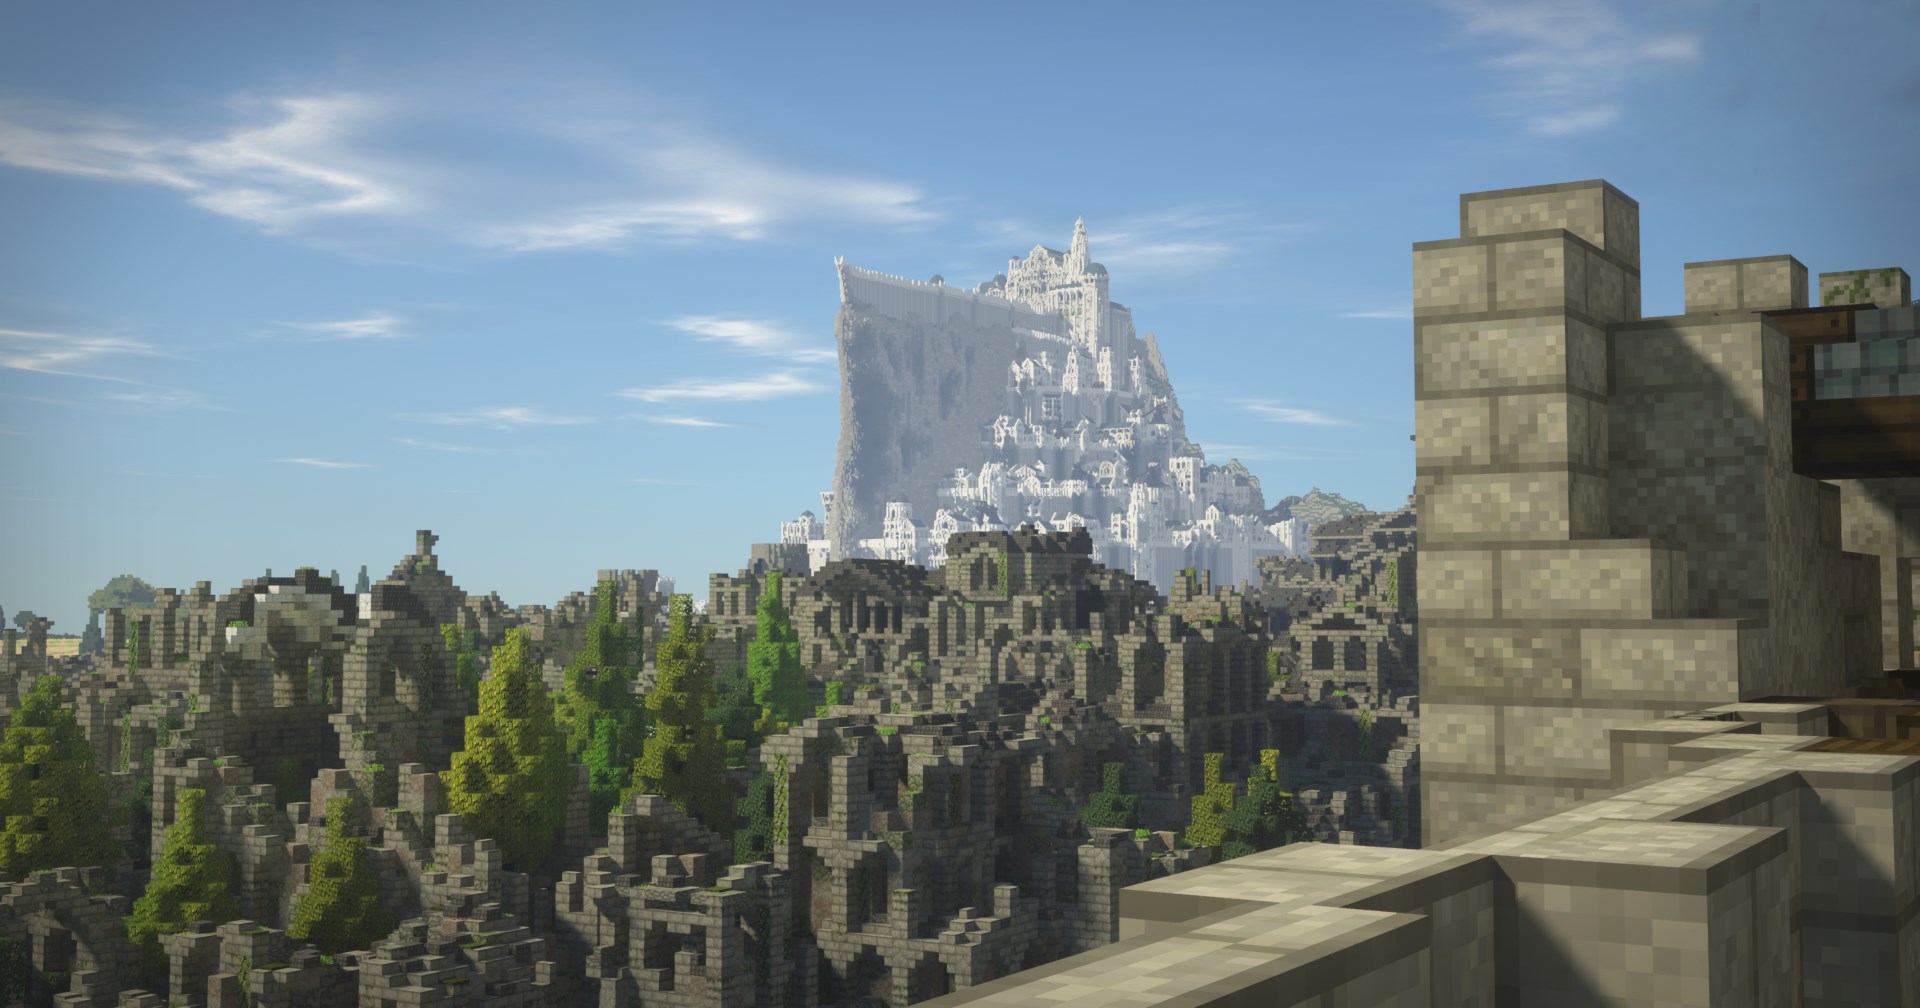 Minecraft x Middle-Earth